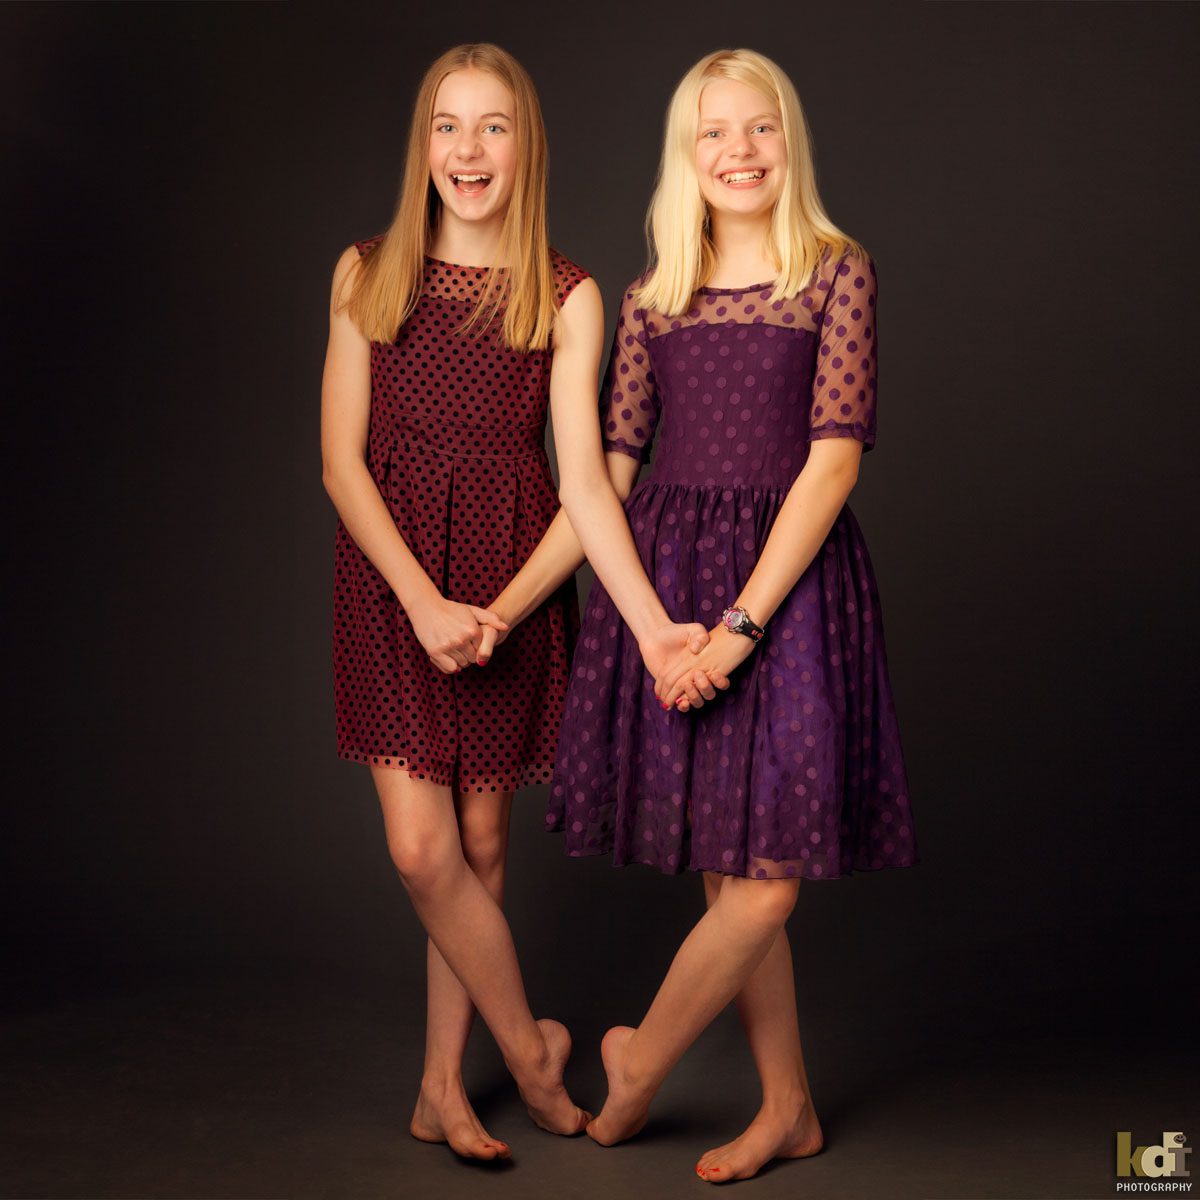 Color studio portrait of sisters holding hands in dresses, by Flagstaff photographer.